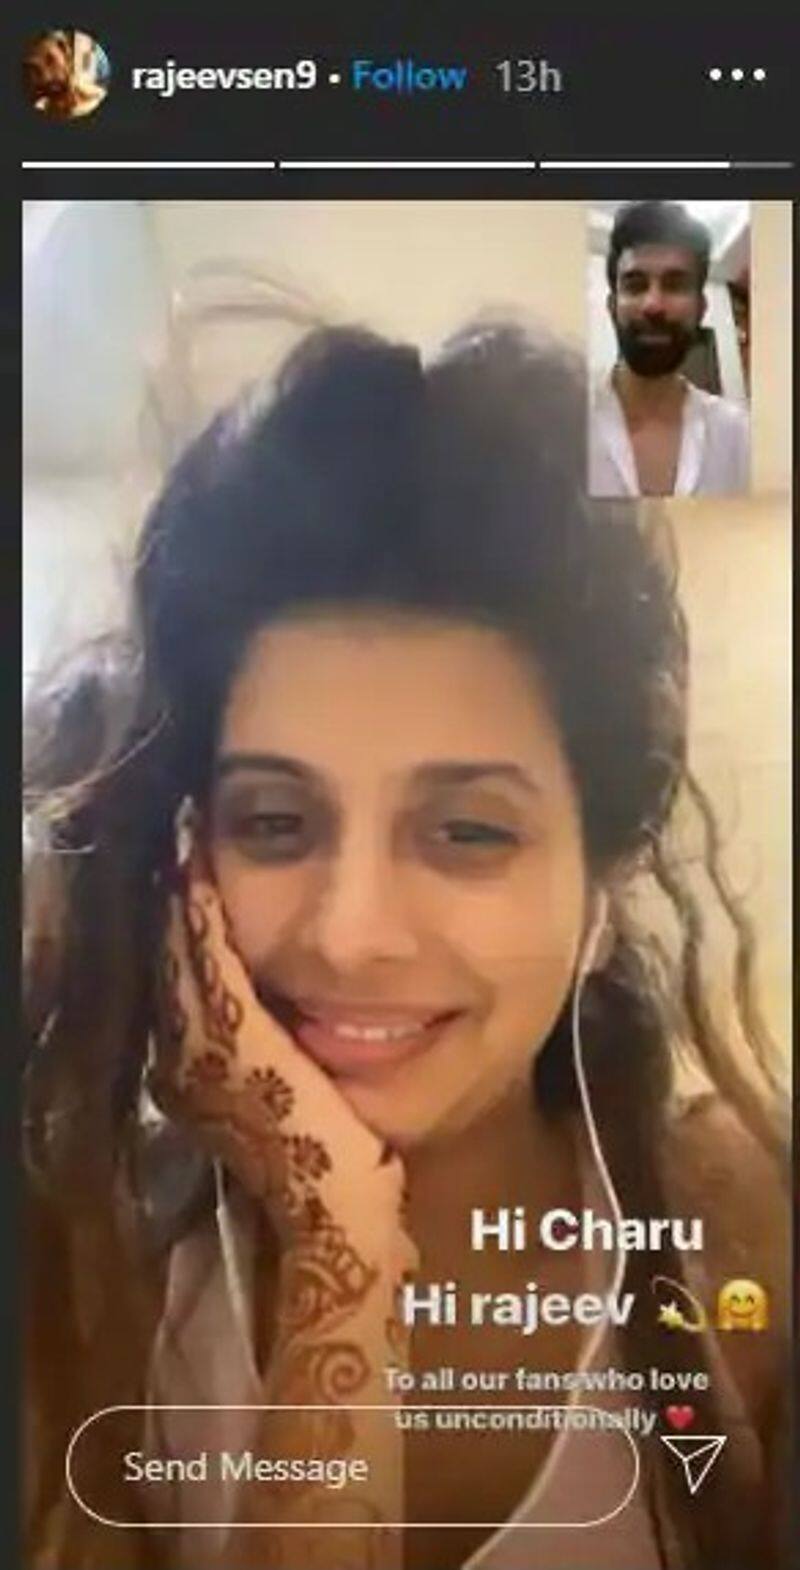 Amid rumours of rift in marriage, Rajeev Sen chats with wife Charu Asopa on video call